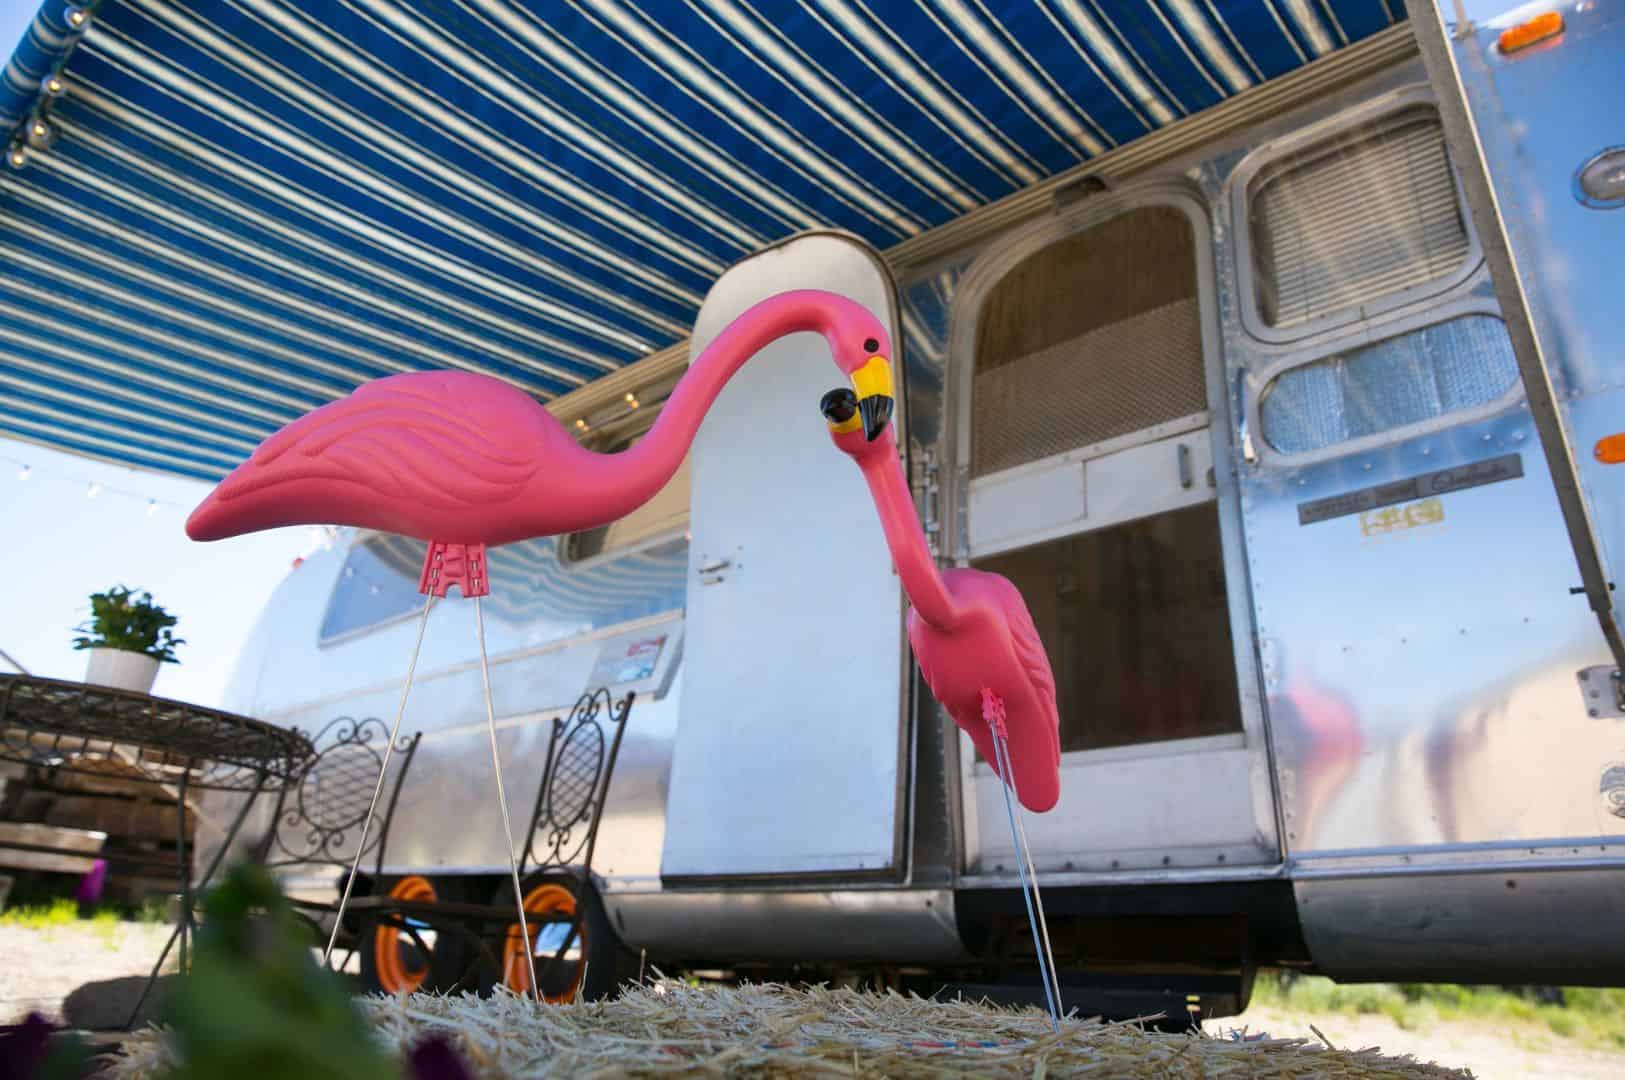 What Do Pink Flamingos Mean In An RV Park?